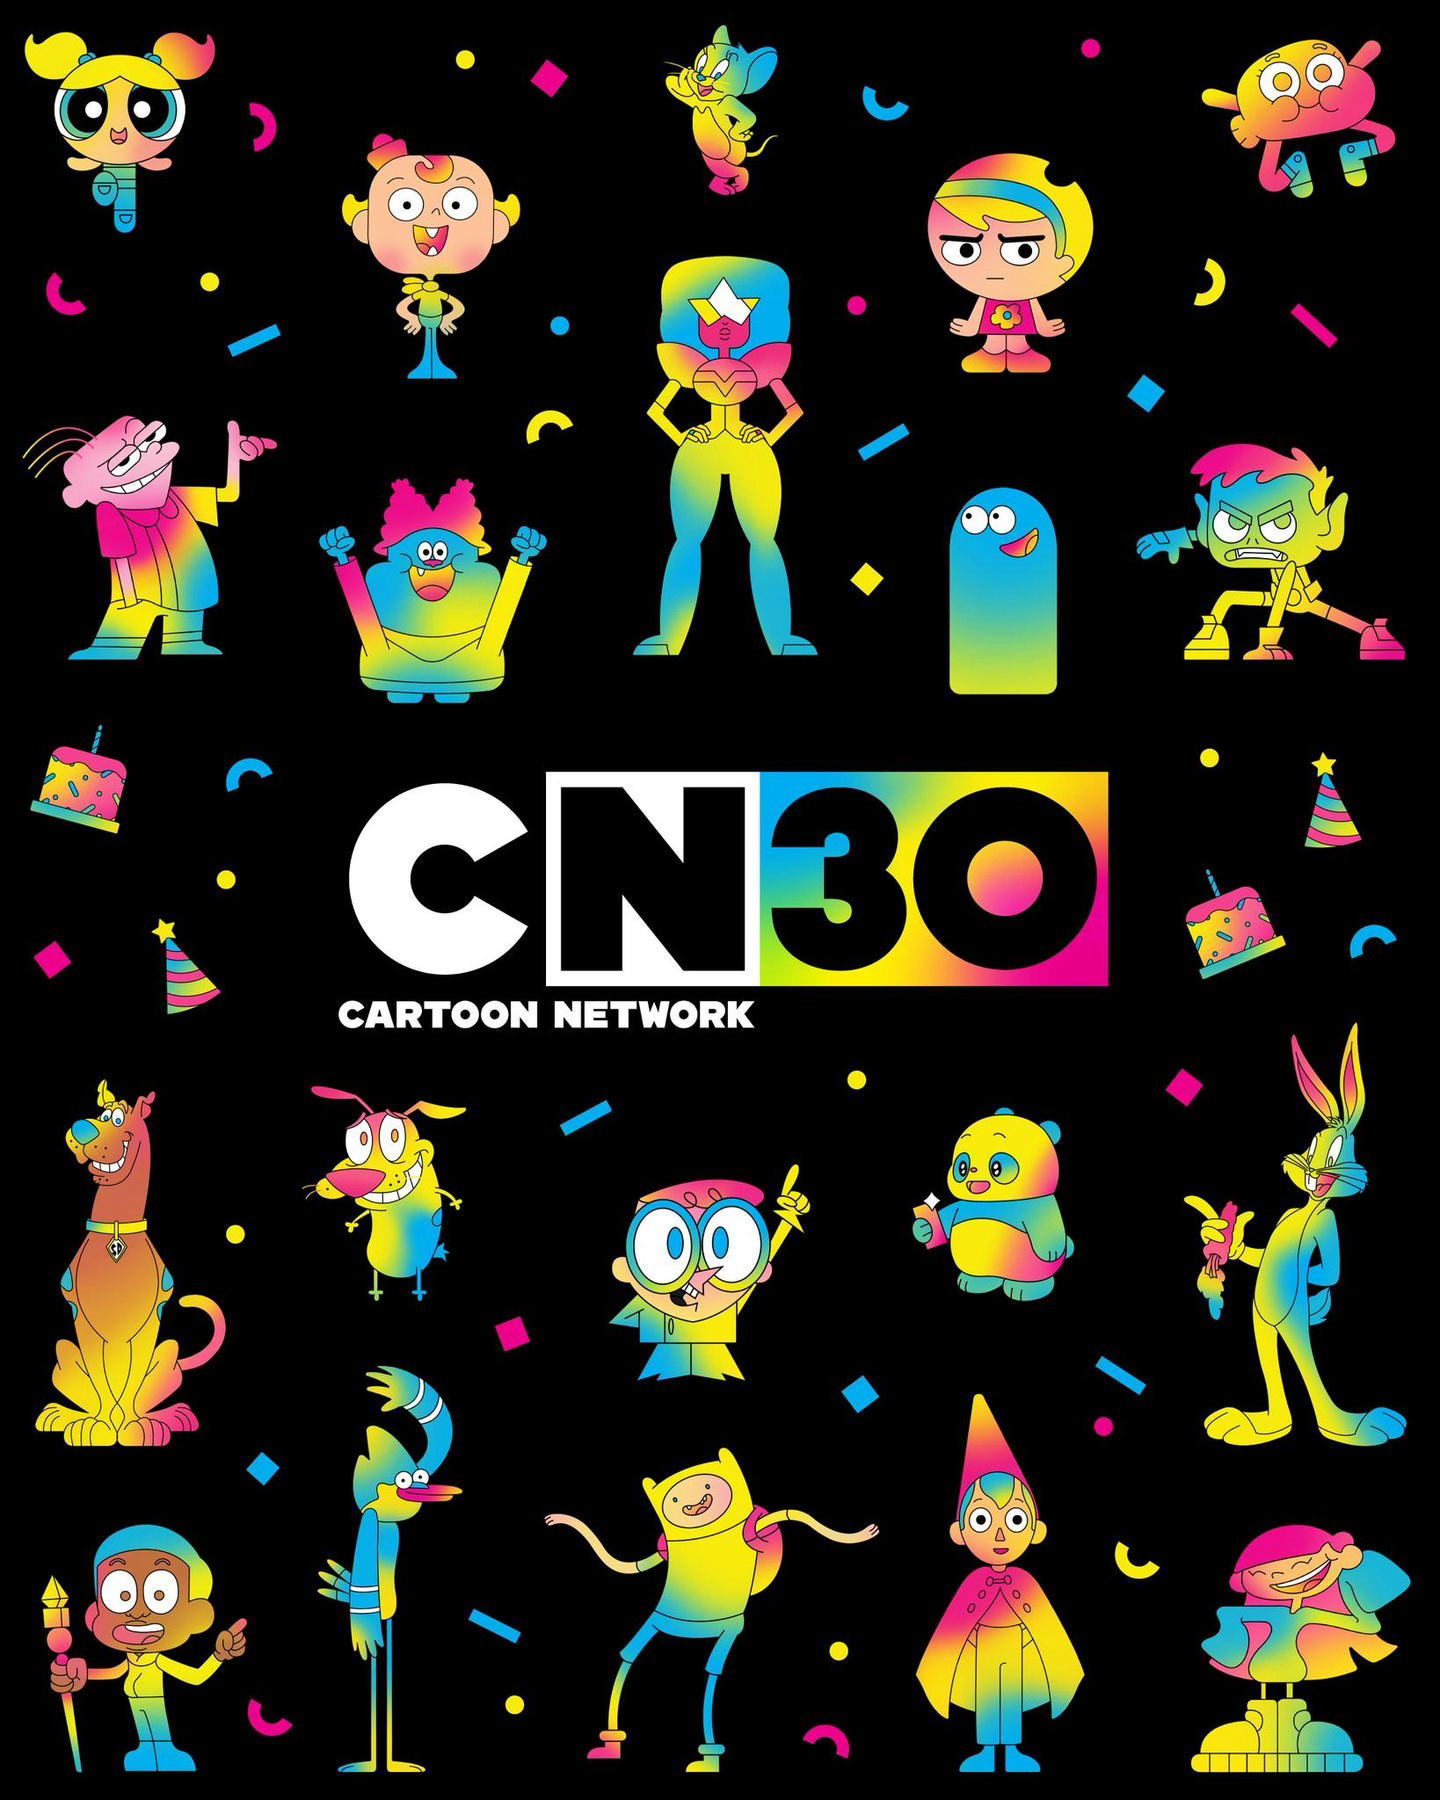 image  1 Cartoon Network - Here's to 3️⃣0️⃣ years of iconic shows, unforgettable characters, and the best fan